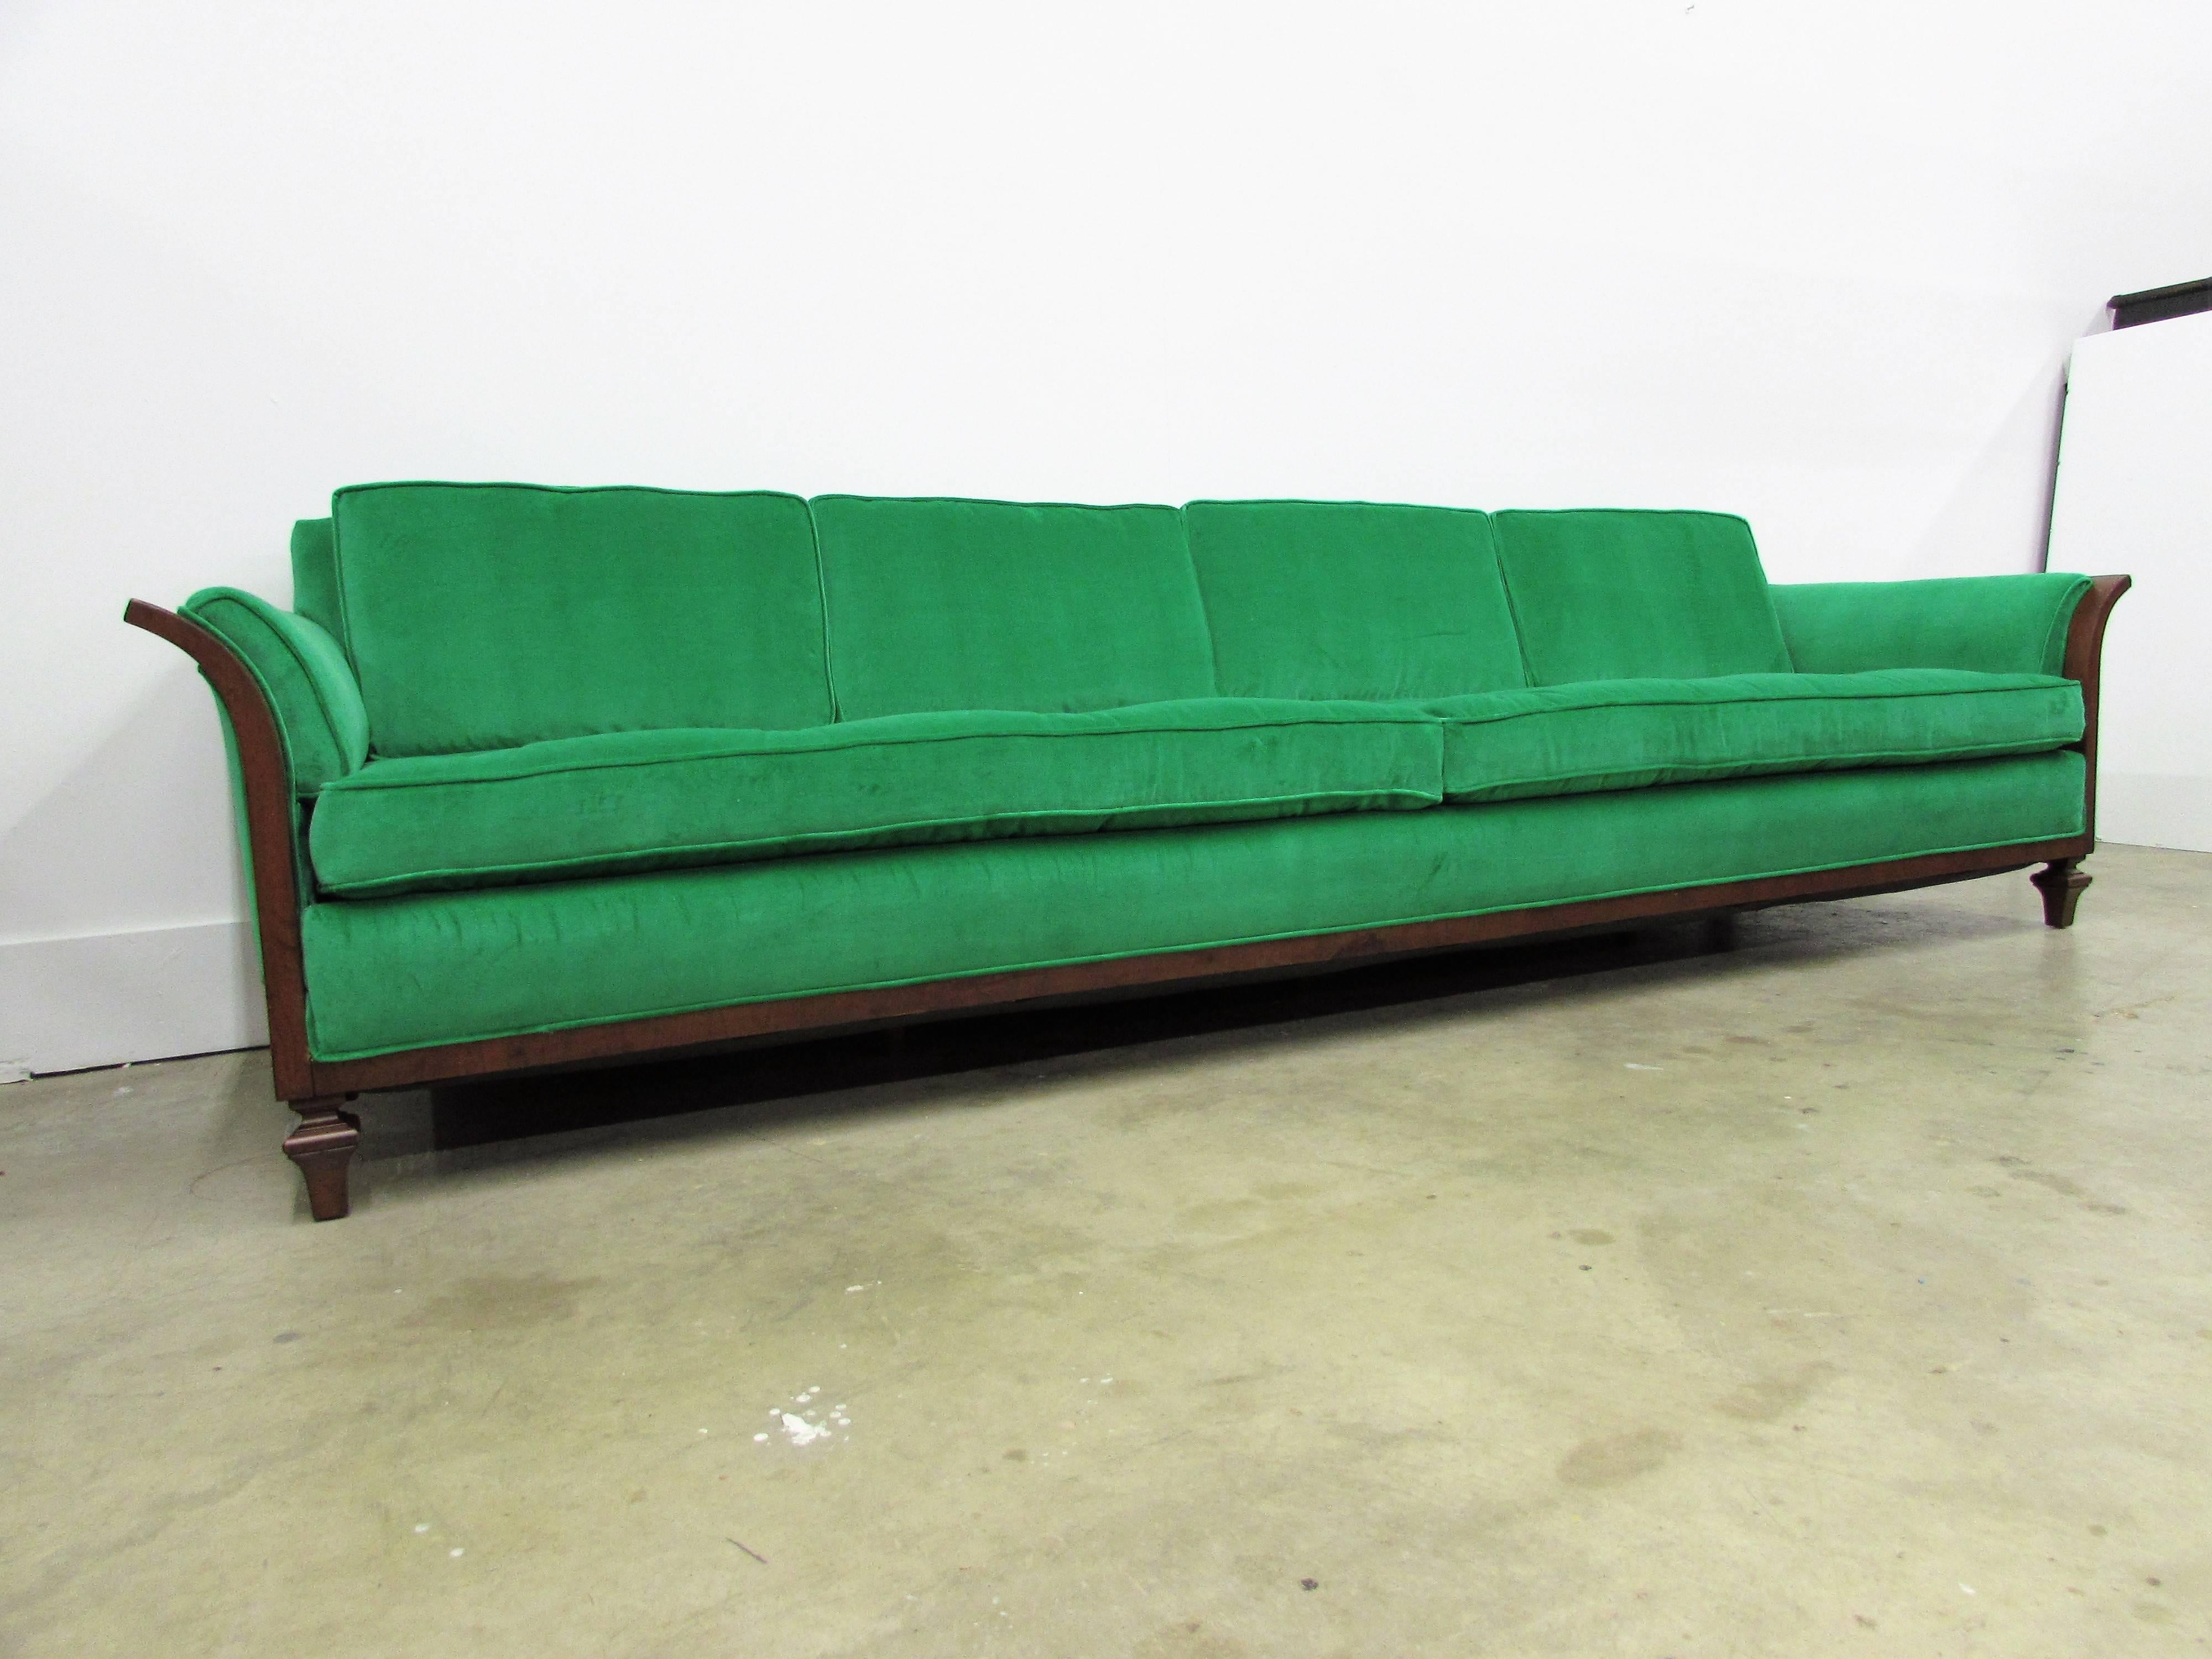 Tomlinson Walnut Sofa- Mid Century with New Upholstery In Excellent Condition For Sale In Raleigh, NC